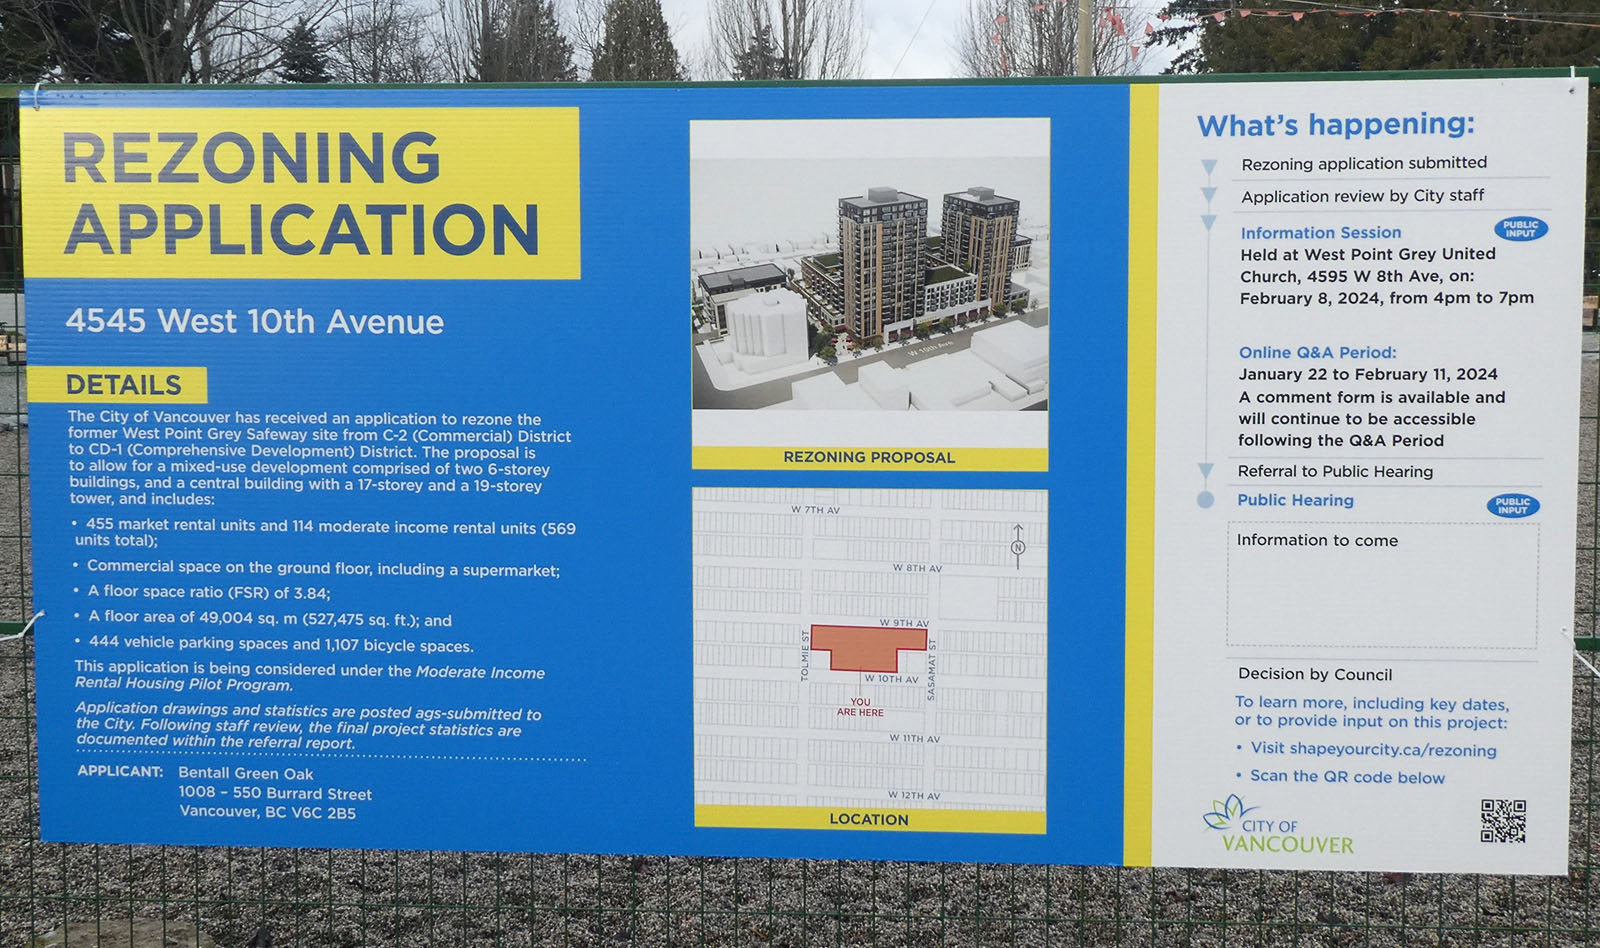 At 2175 West 7th Avenue (Kitsilano) a proposed rezoning and 20